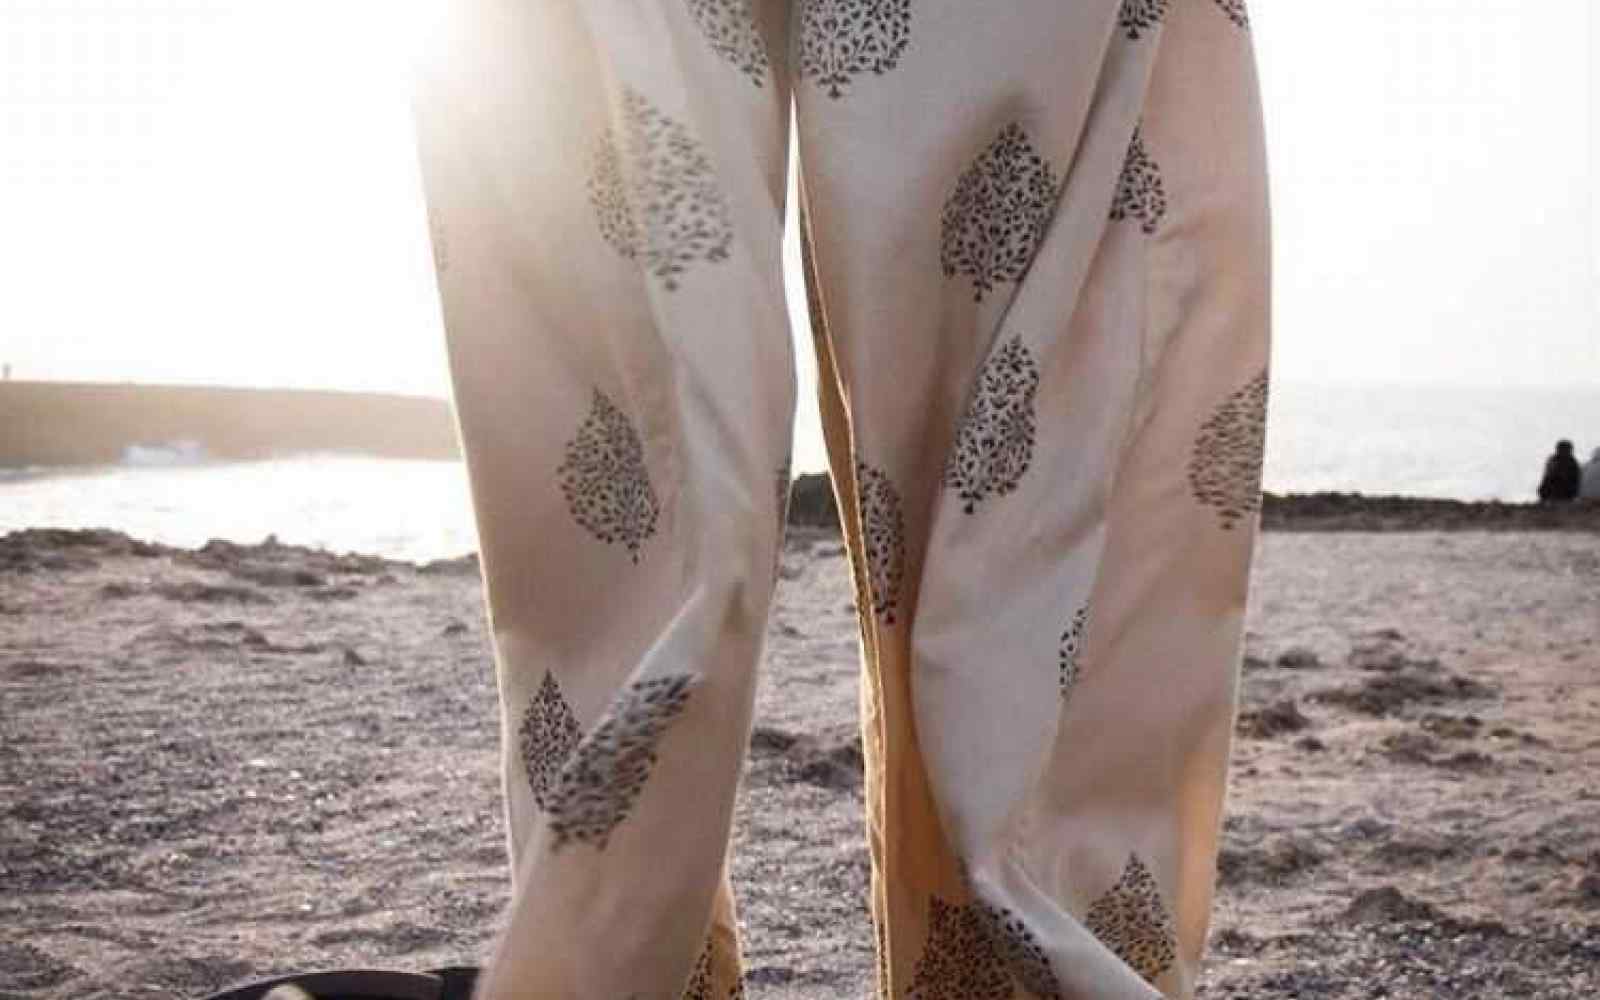 Pants handmade by female artisans involved with Shafat and Janie's venture.